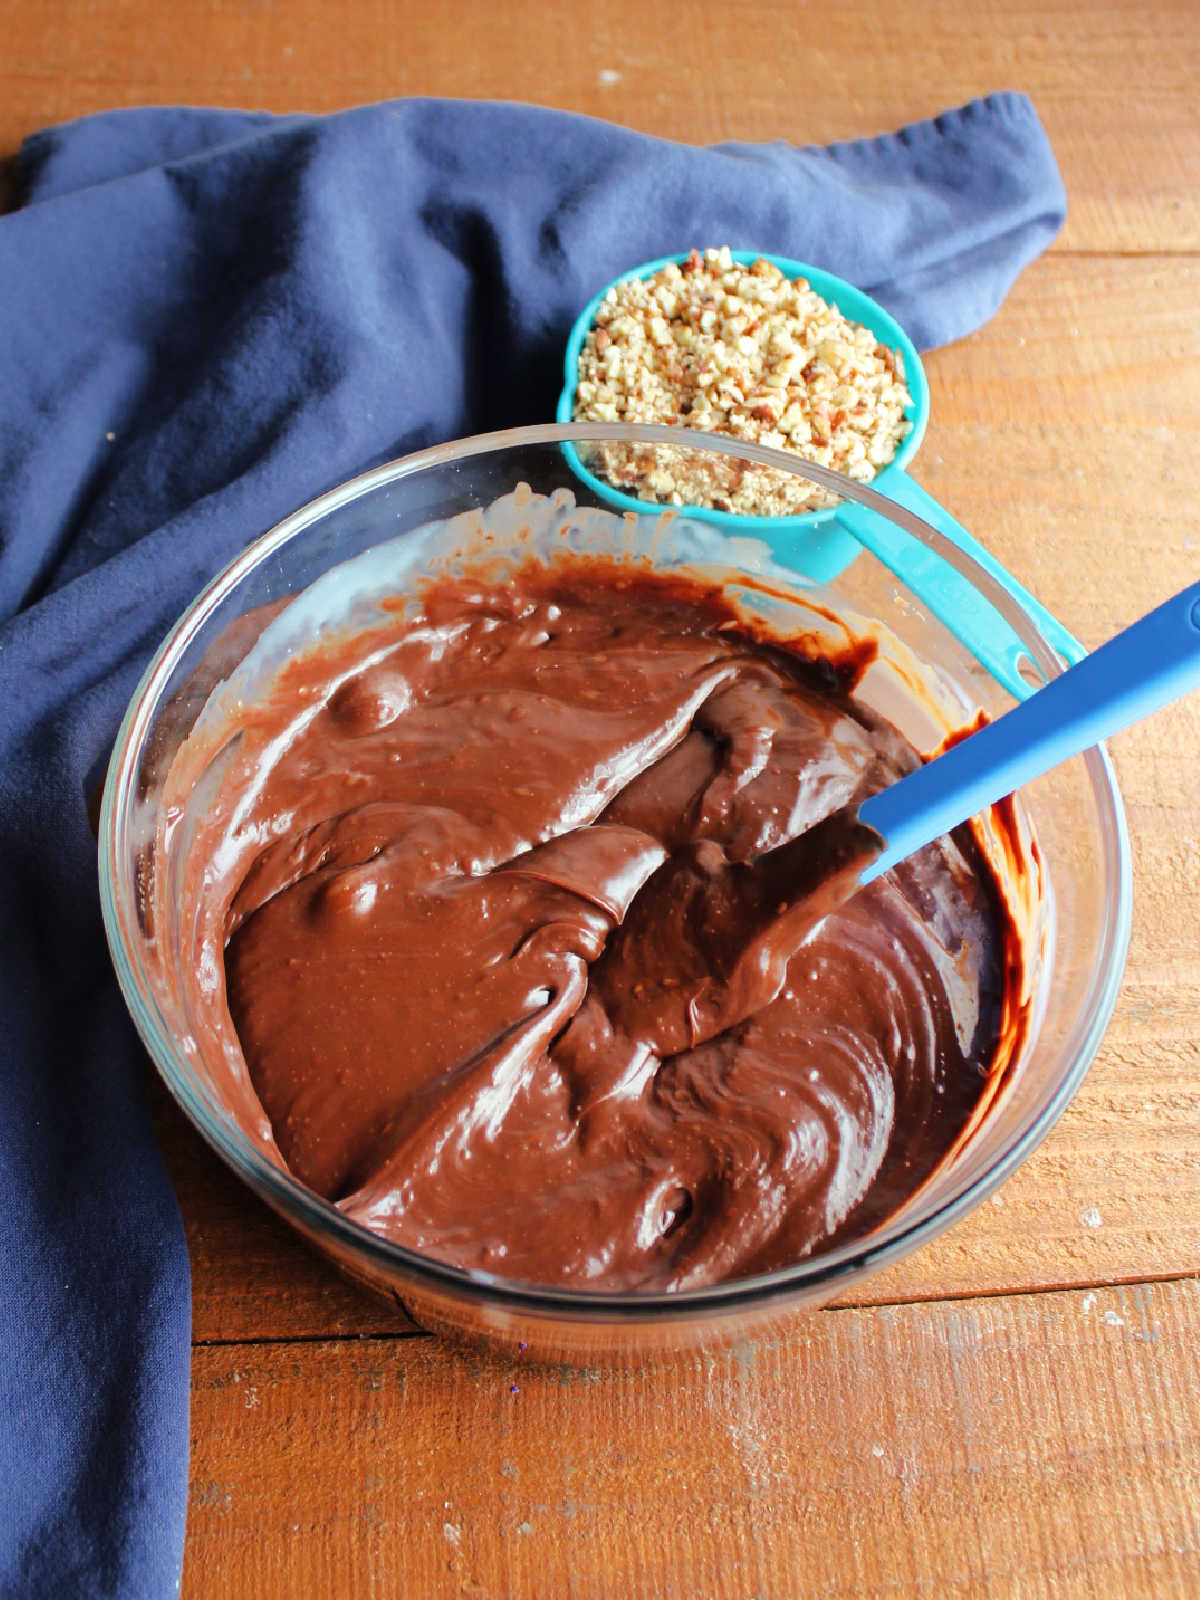 Mixing bowl with melted chocolate and condensed milk mixture inside.